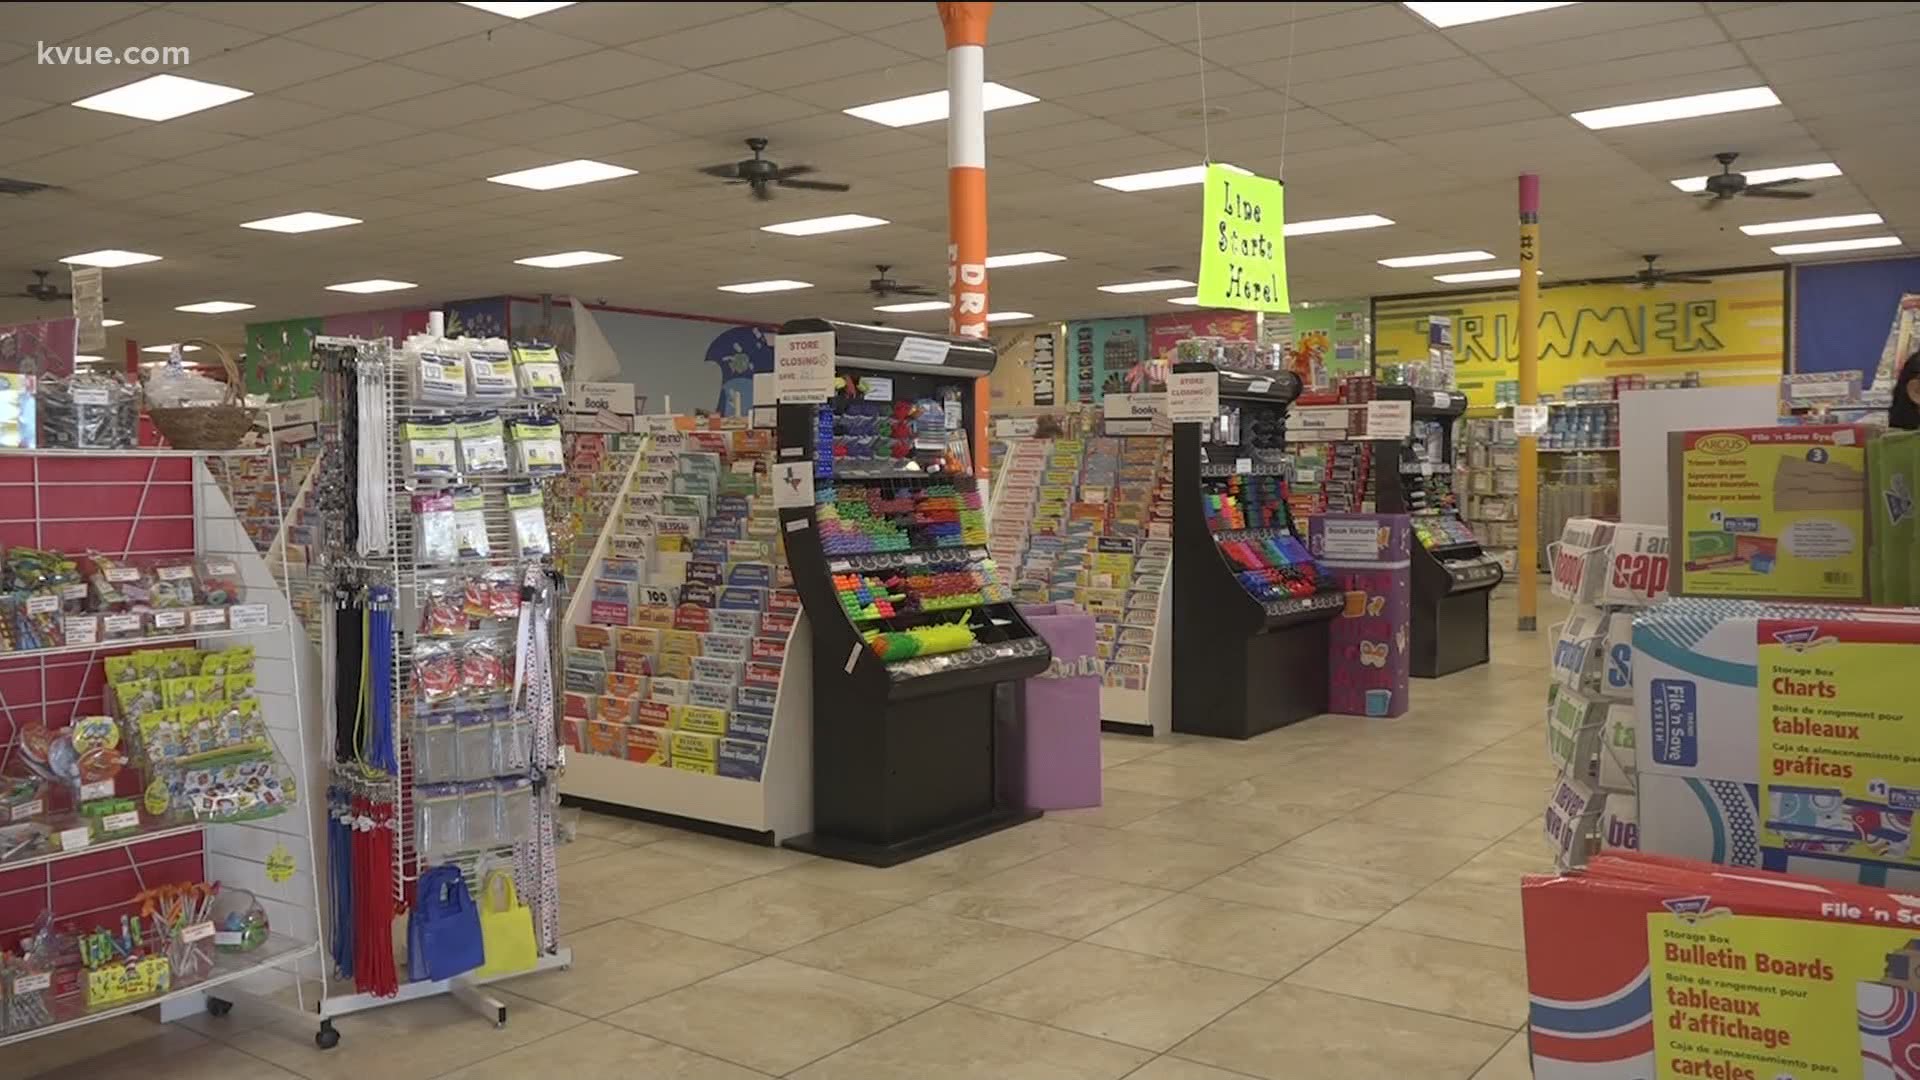 After 24 years, the school supply store Teacher Heaven is slated to closed at the end of August.